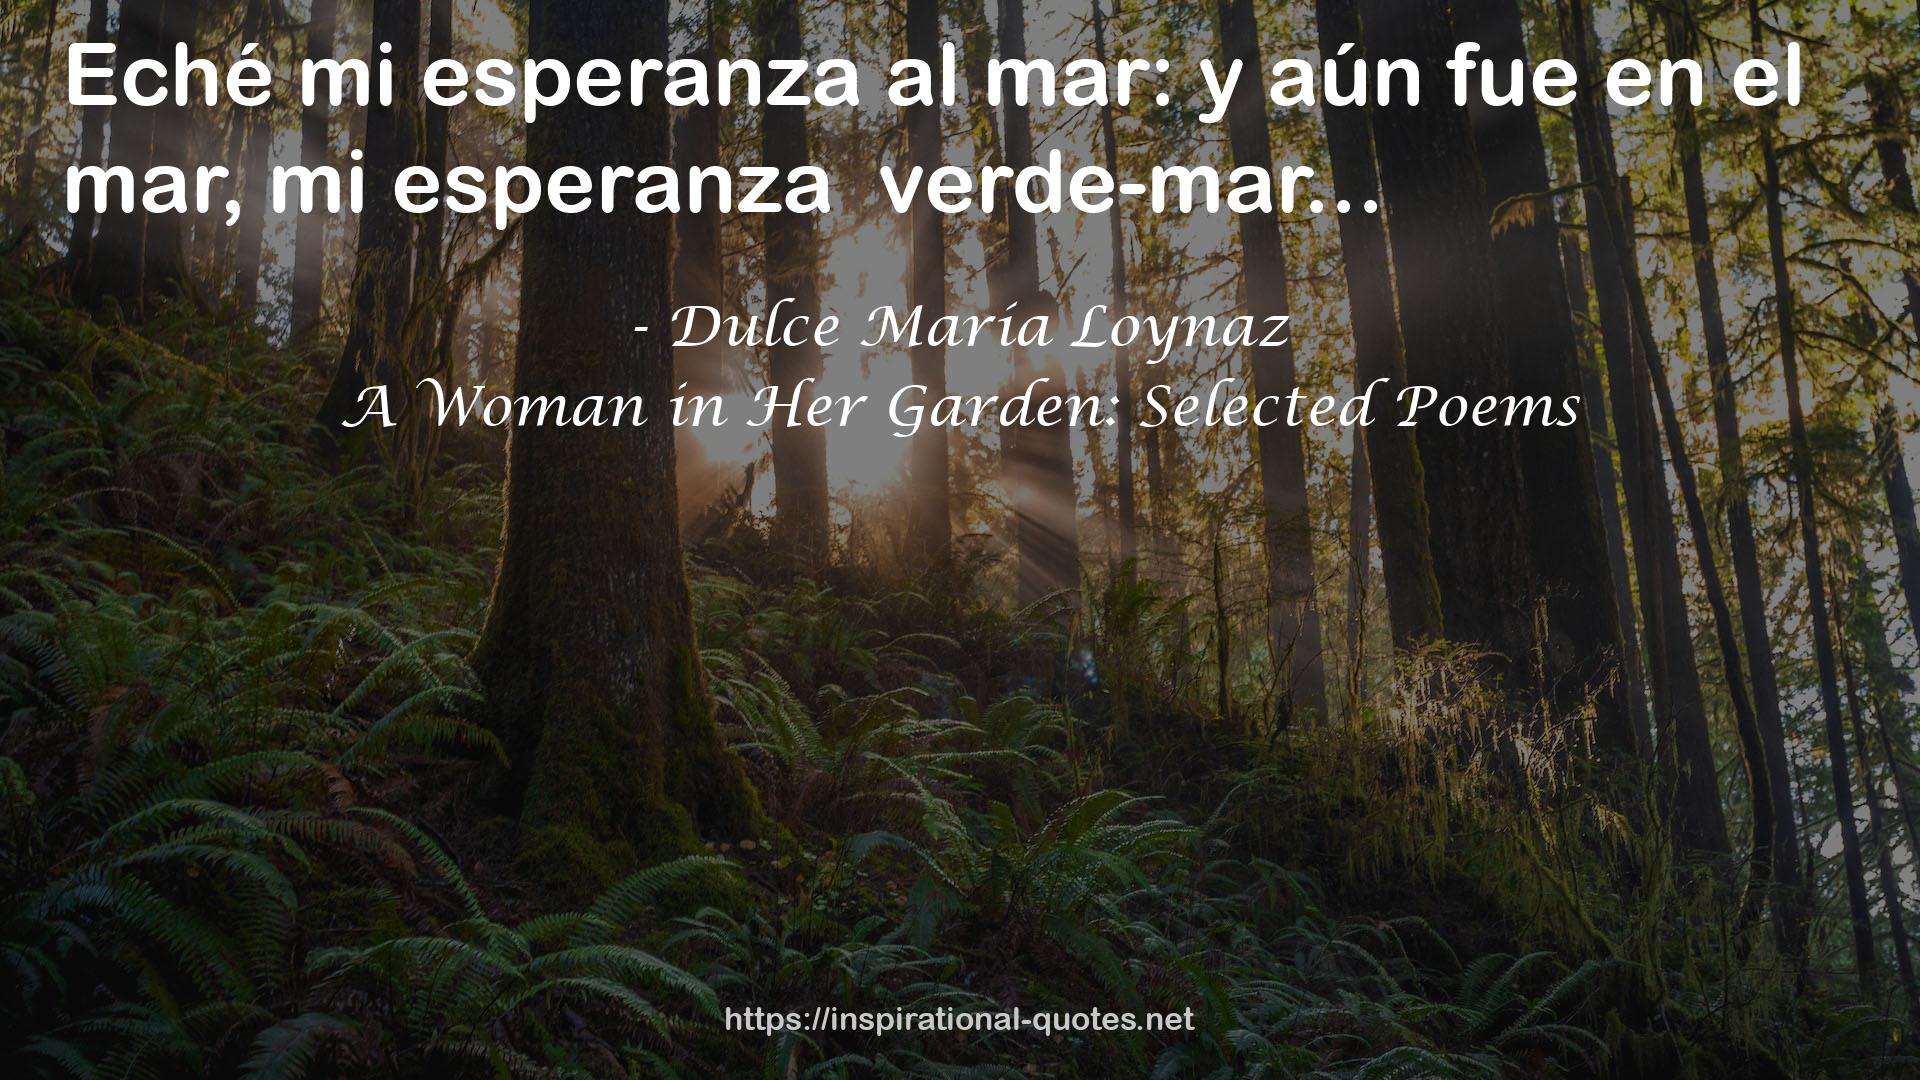 A Woman in Her Garden: Selected Poems QUOTES